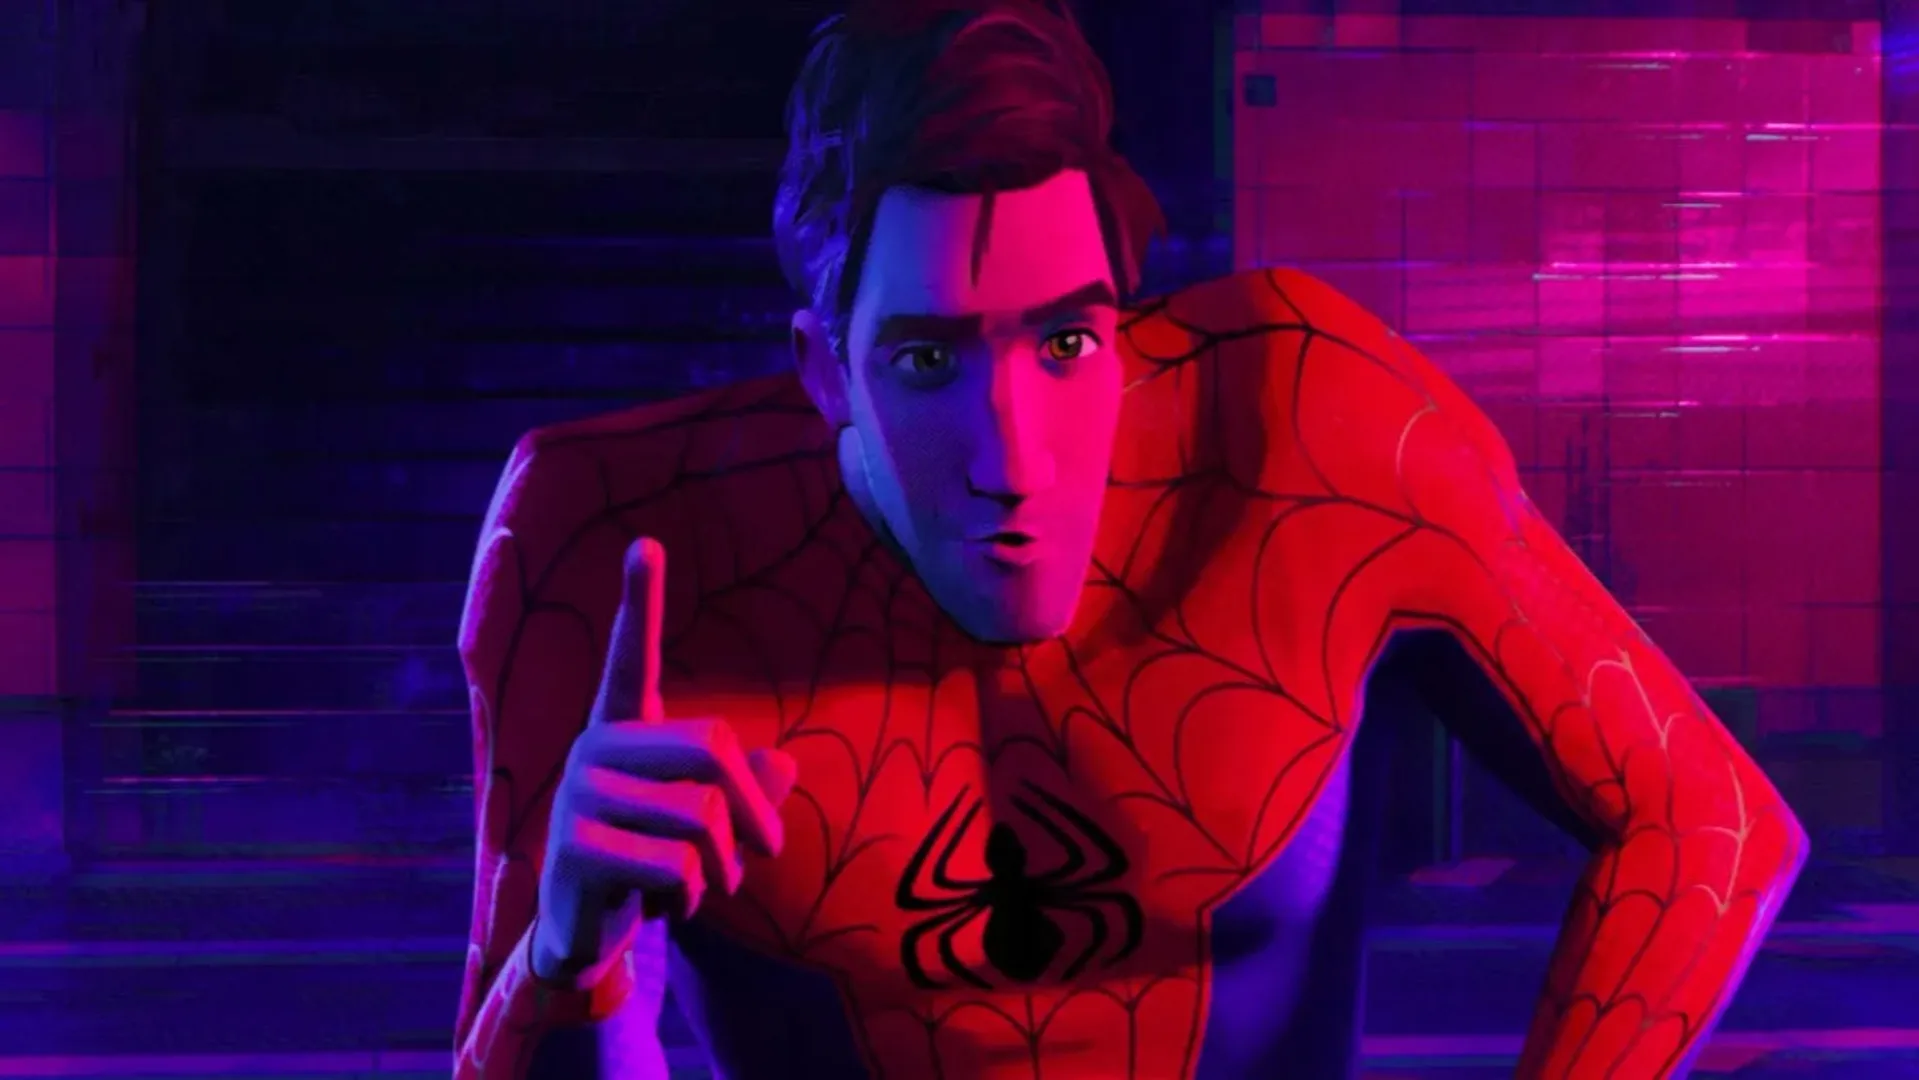 Peter de Into the Spiderverse, posible live action.